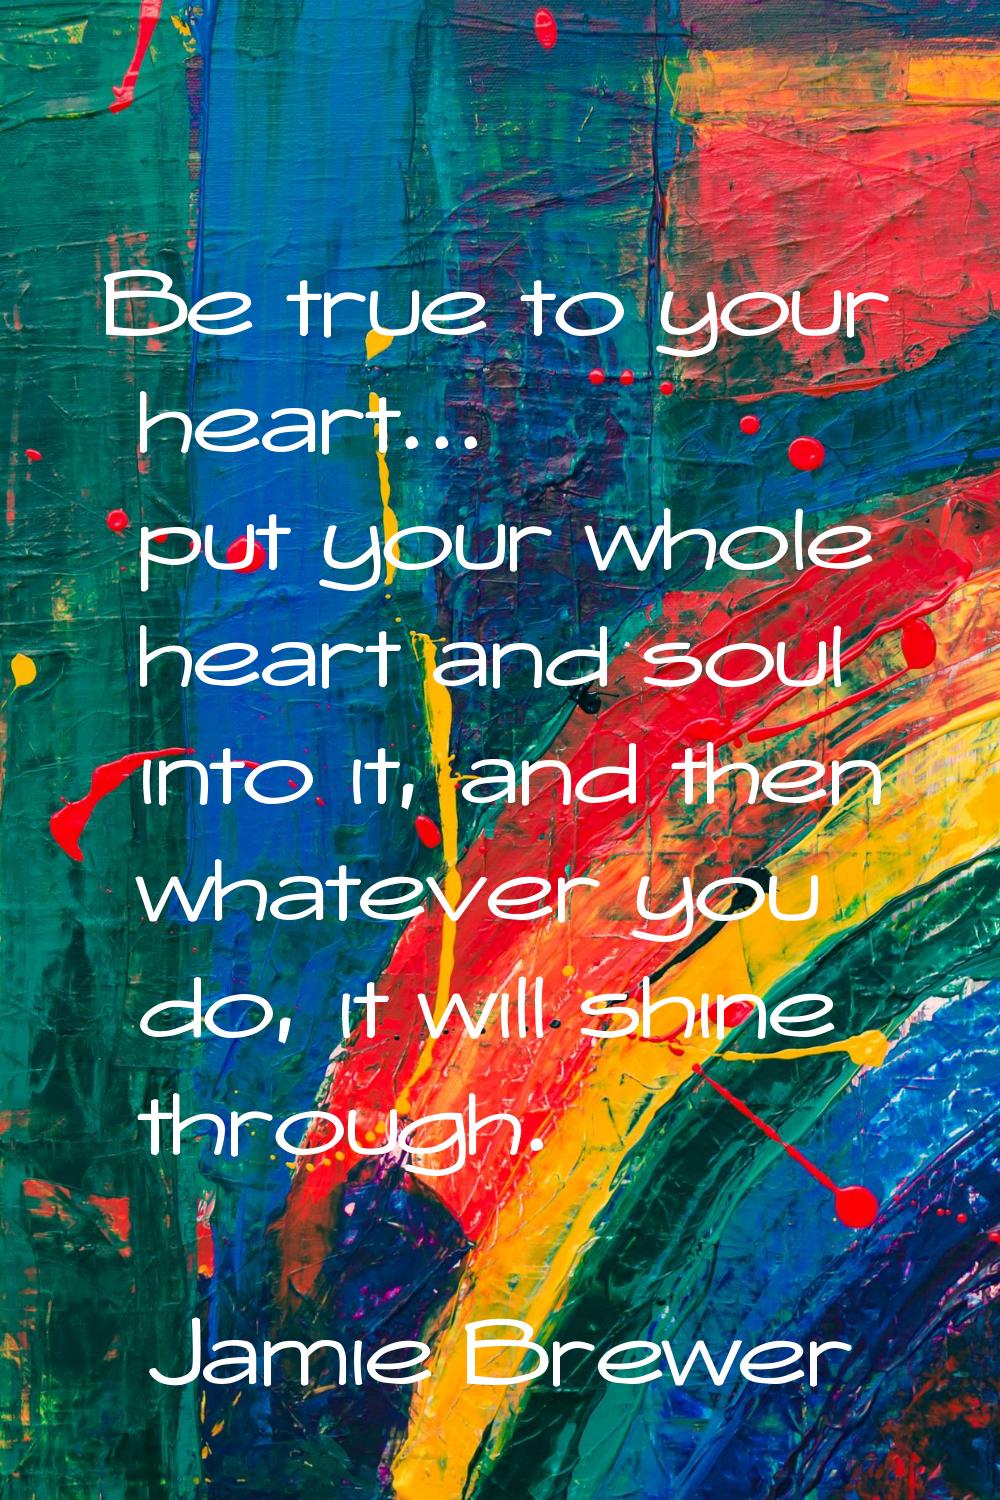 Be true to your heart... put your whole heart and soul into it, and then whatever you do, it will s